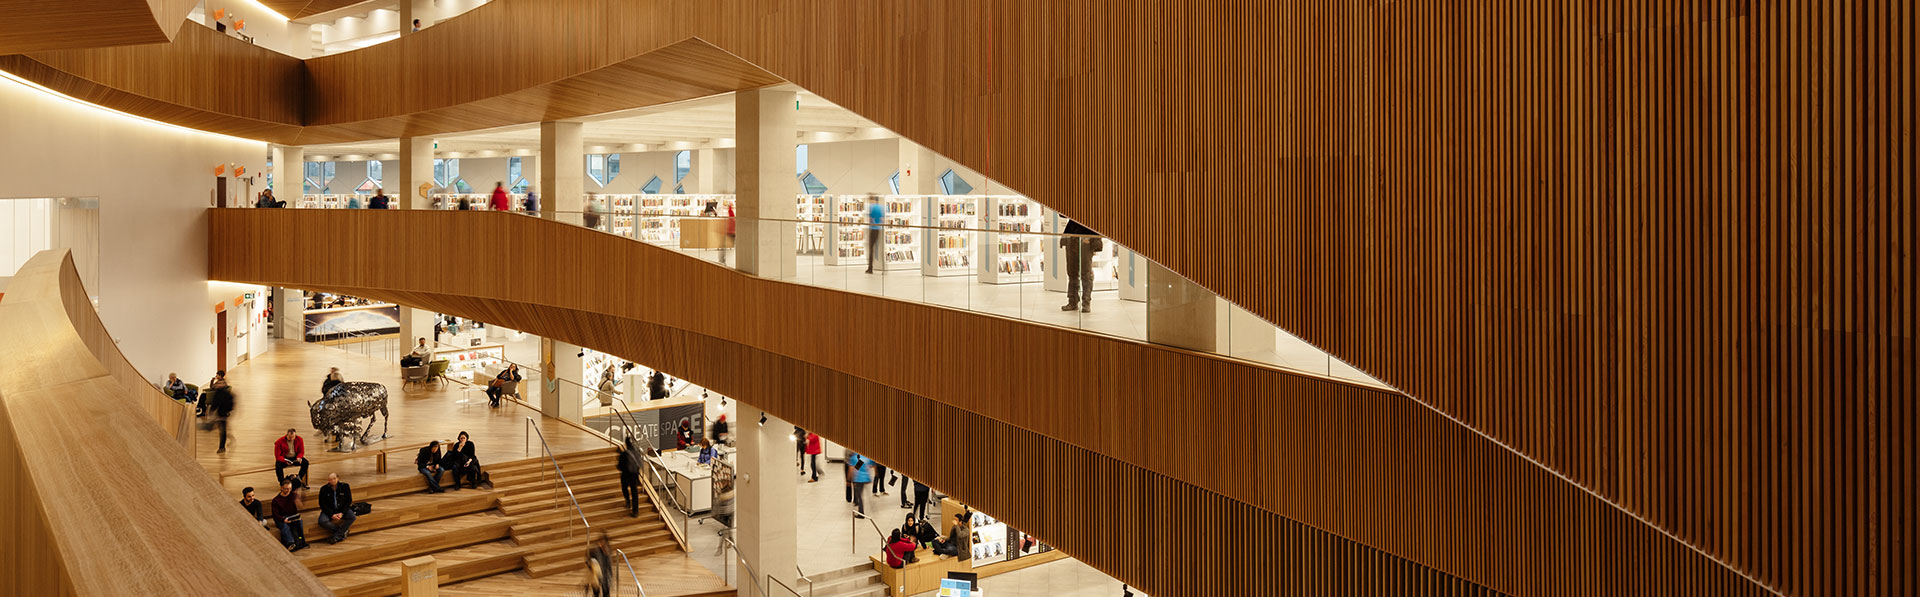 Central Library is An Iconic Must-See Experience in Calgary